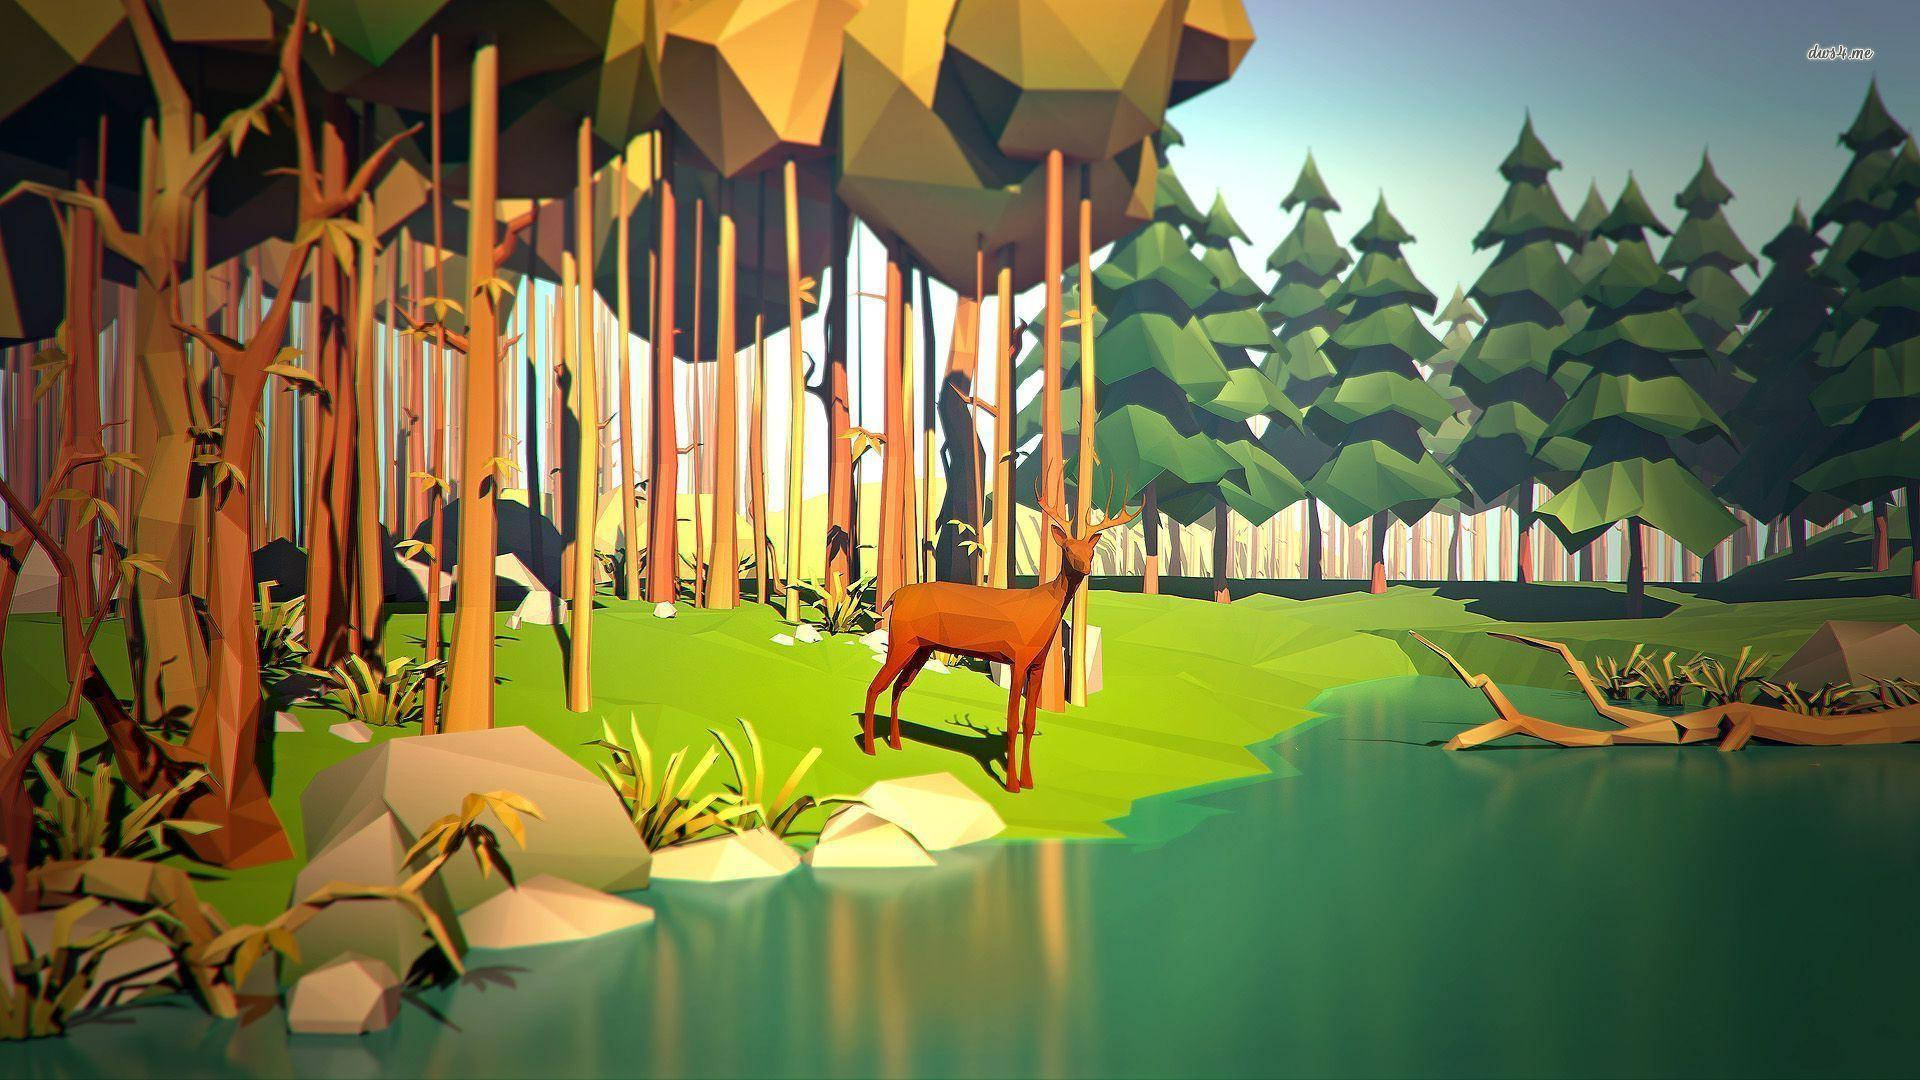 Polygon Art Deer In Forest Background